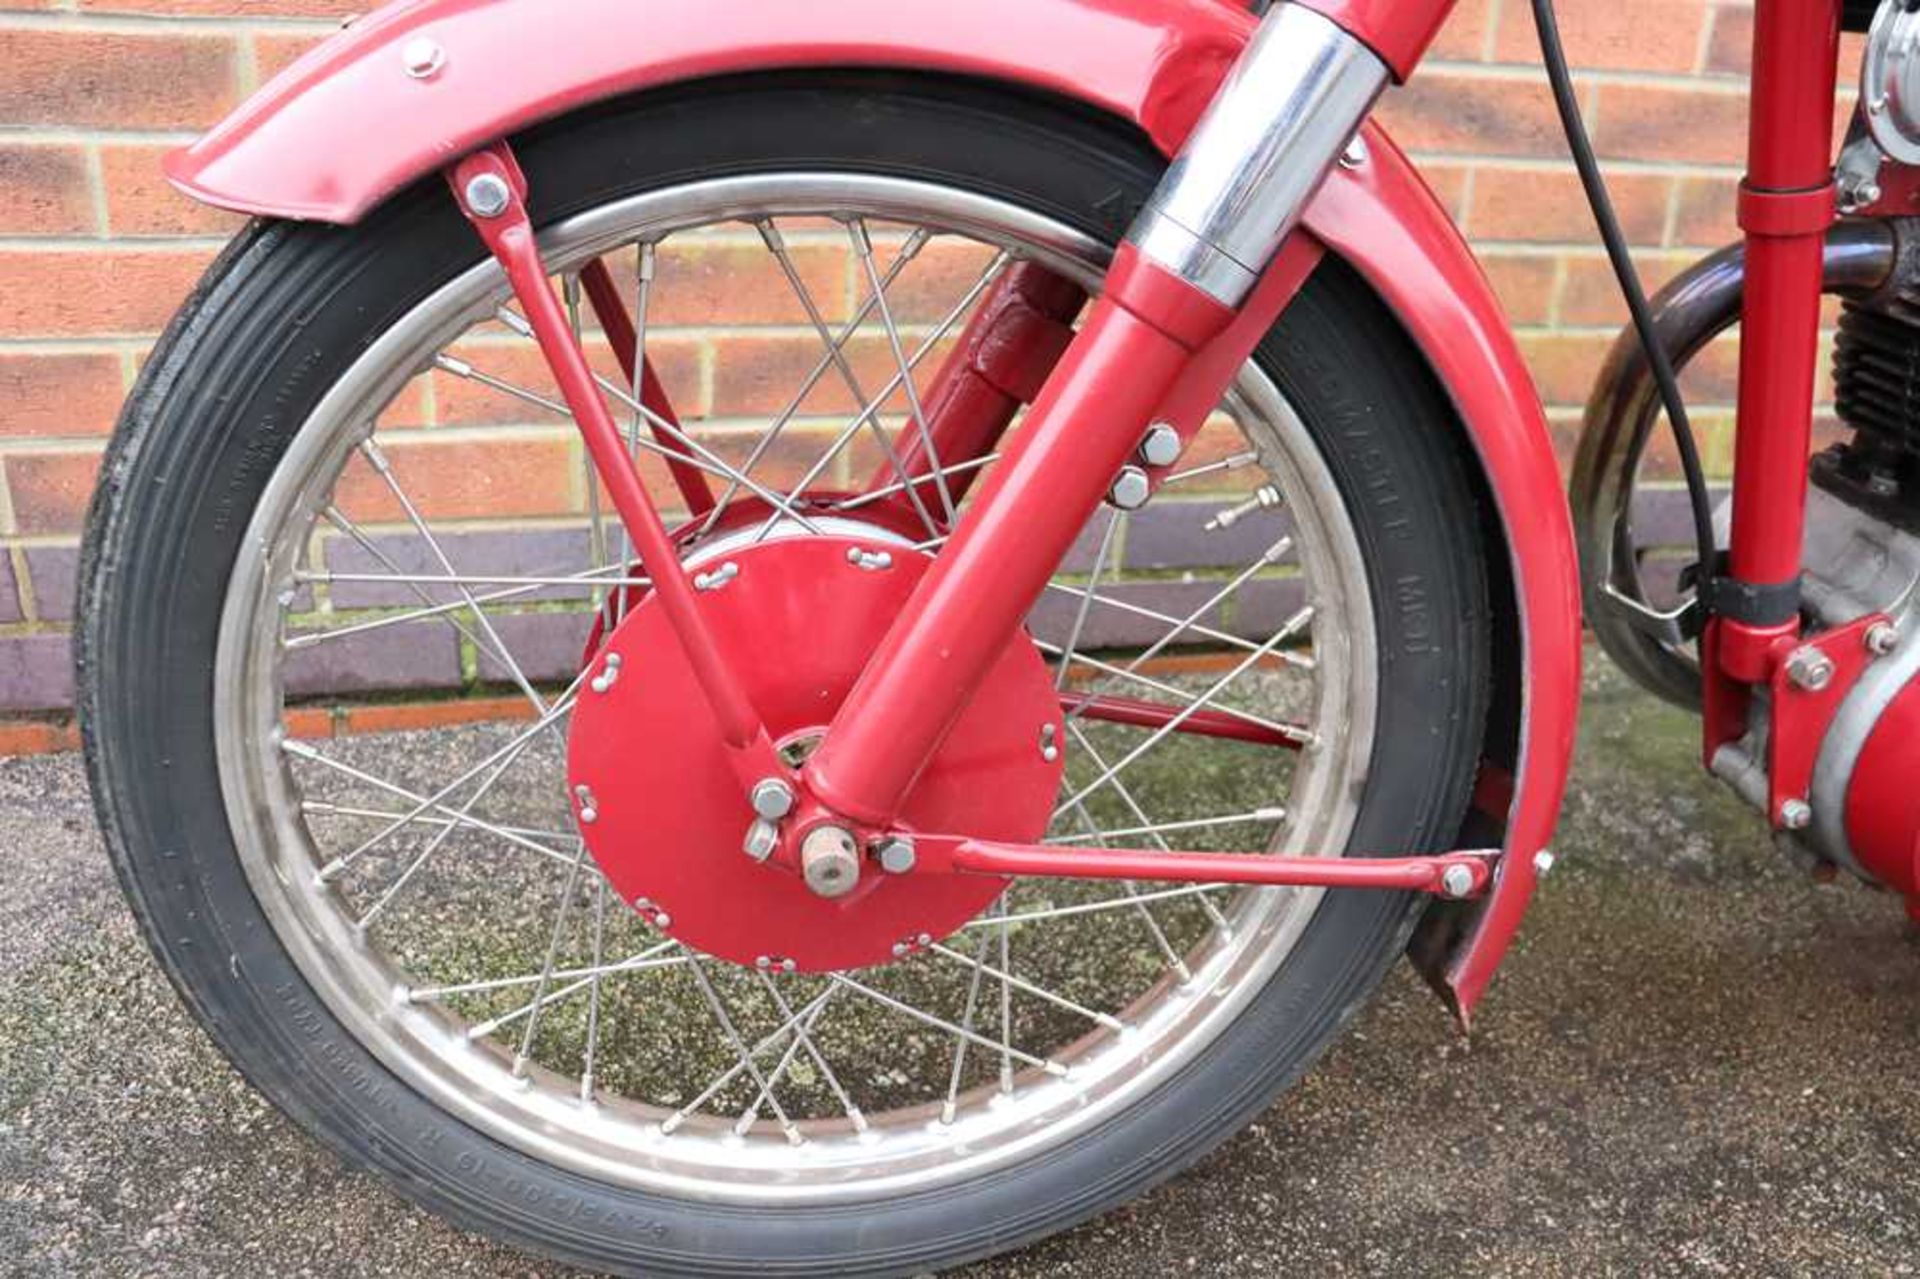 1956 BSA C12 Stainless steel rims and spokes - Image 22 of 44